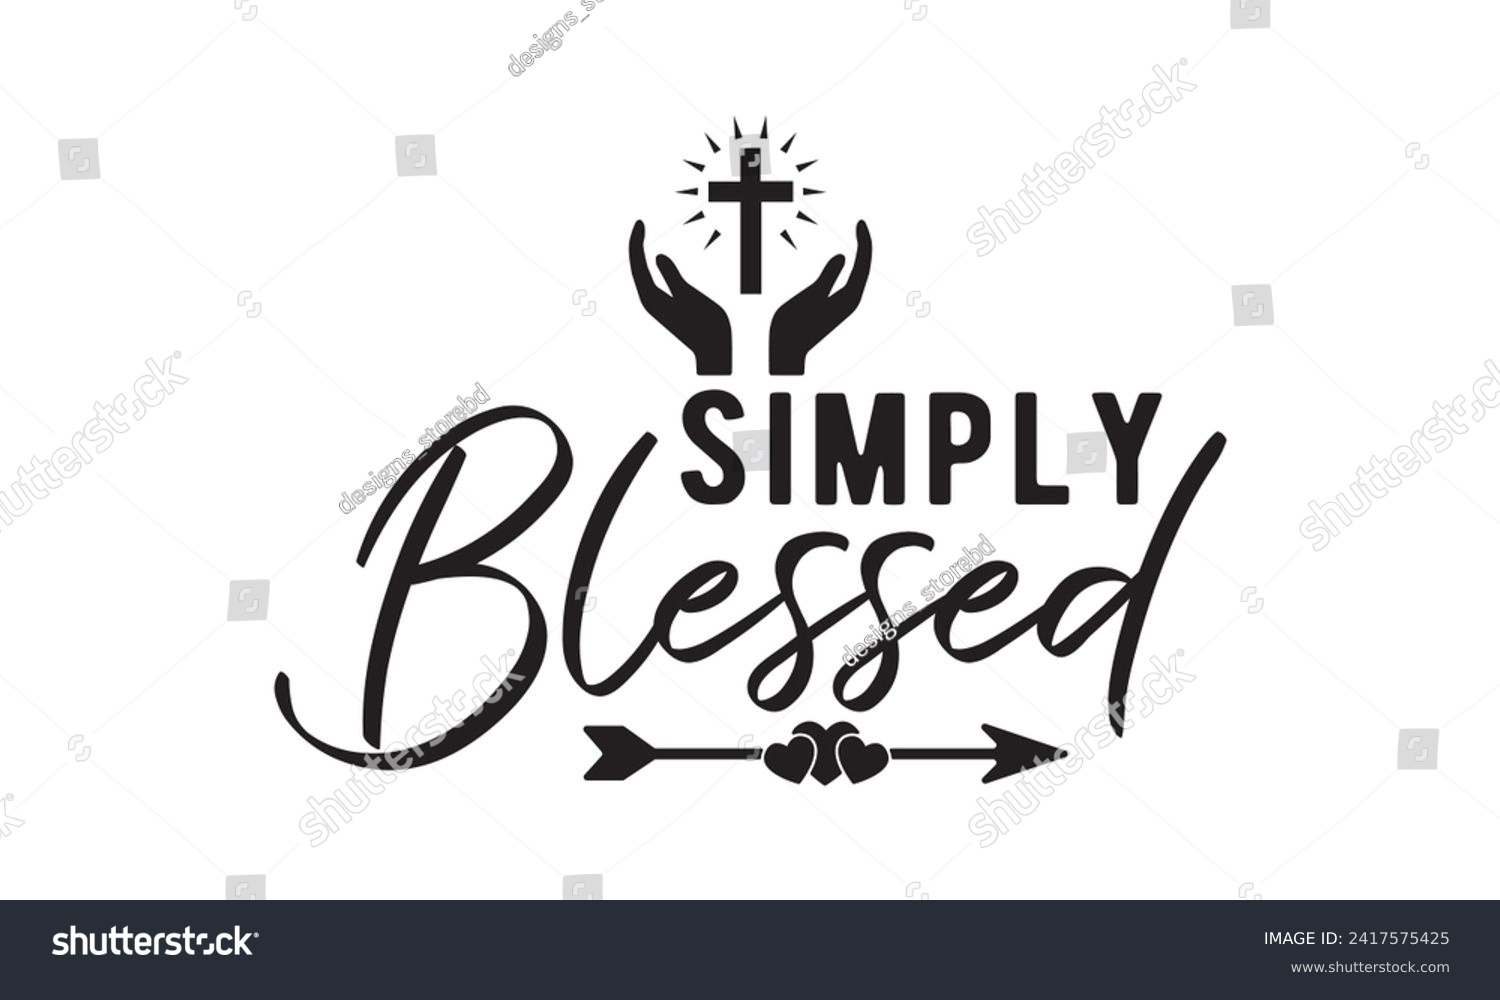 SVG of Simply blessed,christian,jesus,Jesus Christian t-shirt design Bundle,Retro christian,funny christian,Printable Vector Illustration,Holiday,Cut Files Cricut,Silhouette,png svg